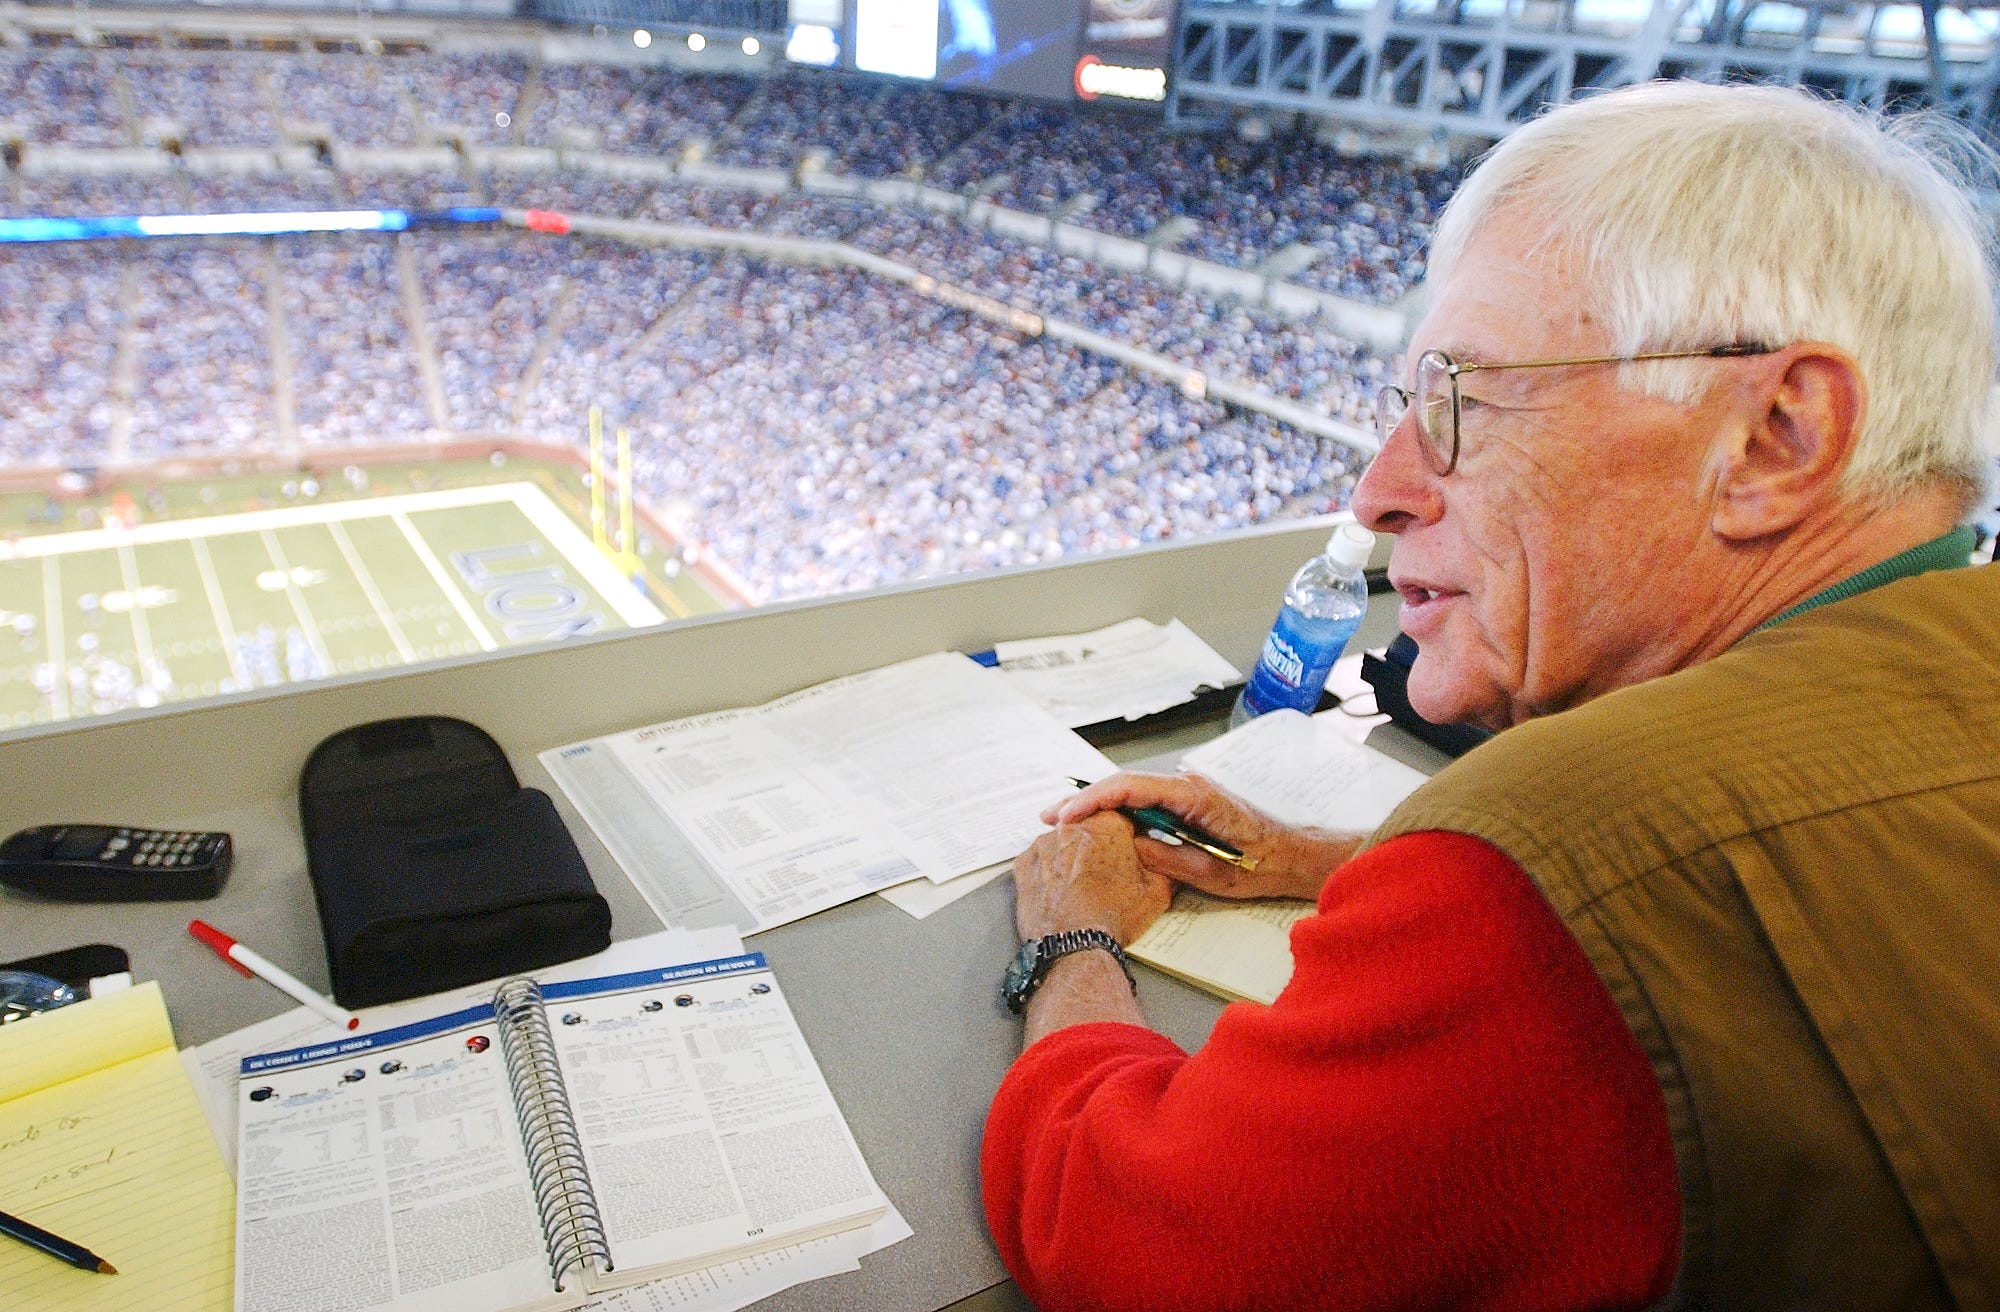 Retiring Detroit News sports writer Jerry Green watches 4th quarter action of the Detroit Lions 28-16 win over the Houston Texans from his seat in the press box at Ford Field in Detroit, Michigan on September 19, 2004.